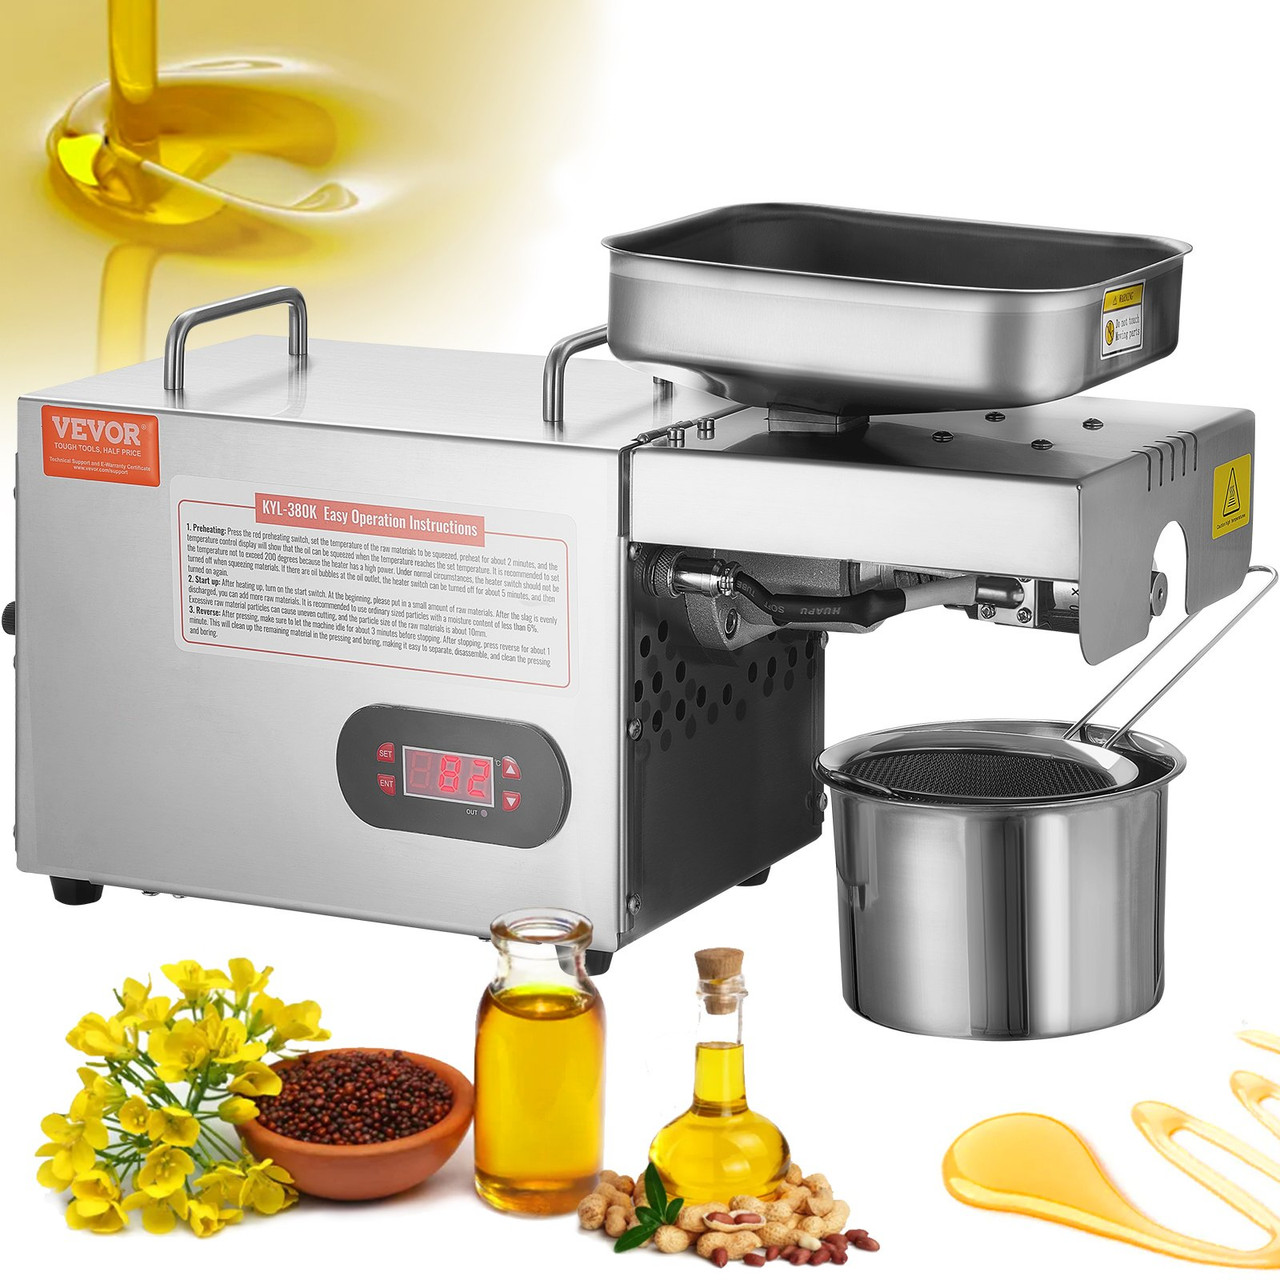 VEVOR Electric Oil Press Machine, 850W Stainless Steel Oil Extractor Machine, 0-300? / 32 - 572 ? Adjustable Temperature, Hot Press Oil Expeller for Pressing Peanuts, Sesame Seeds, Rapeseed, Tea Seeds